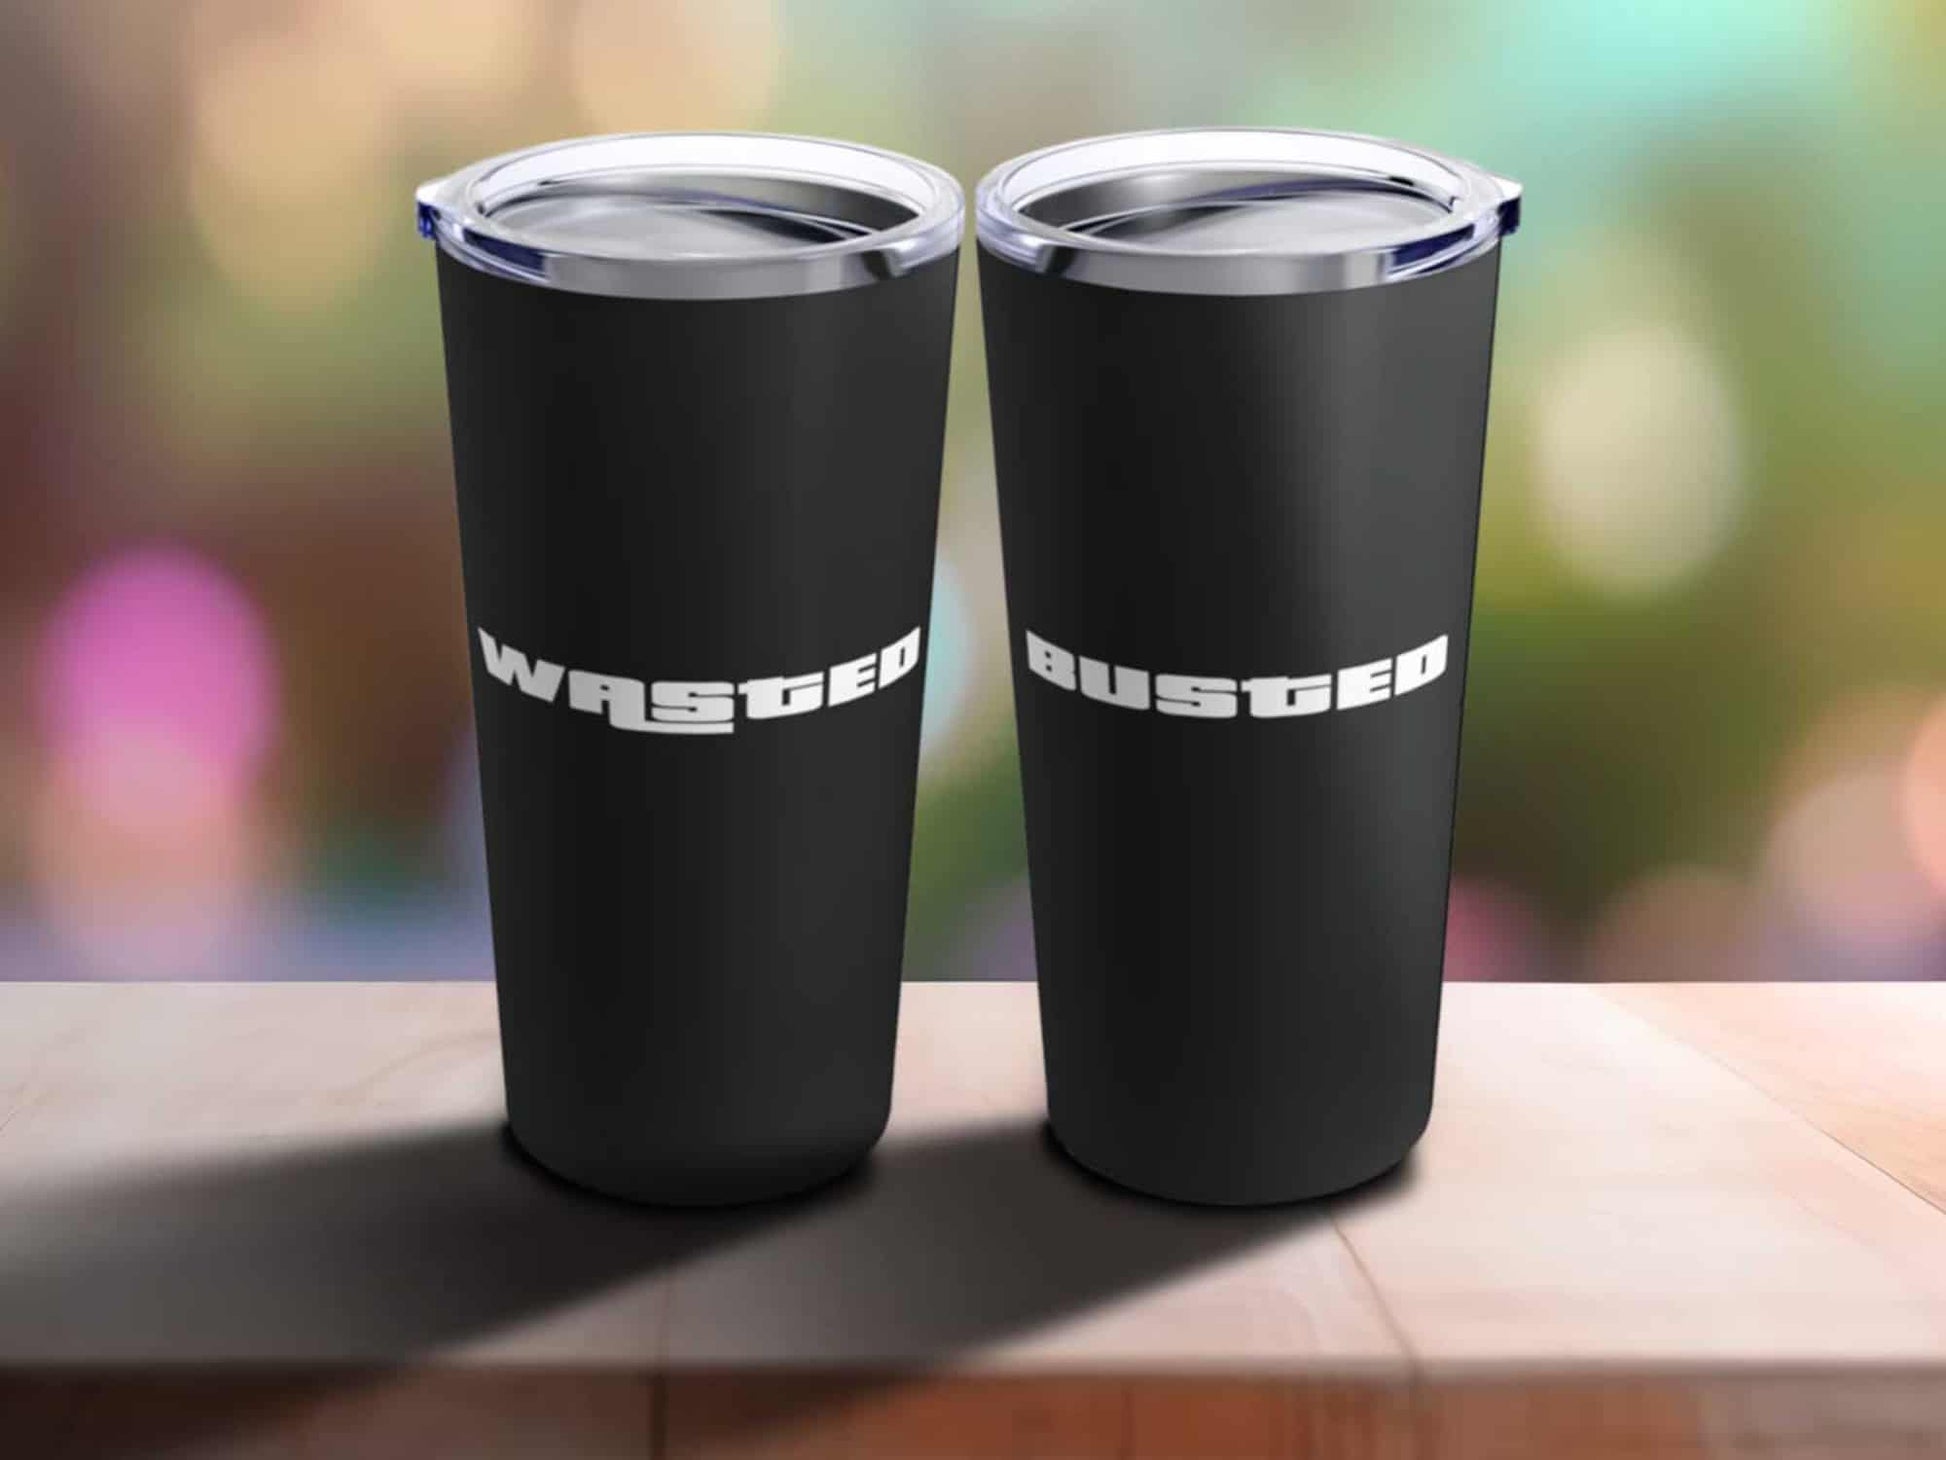 Wasted Busted Double-Sided Design Tumbler - 20oz